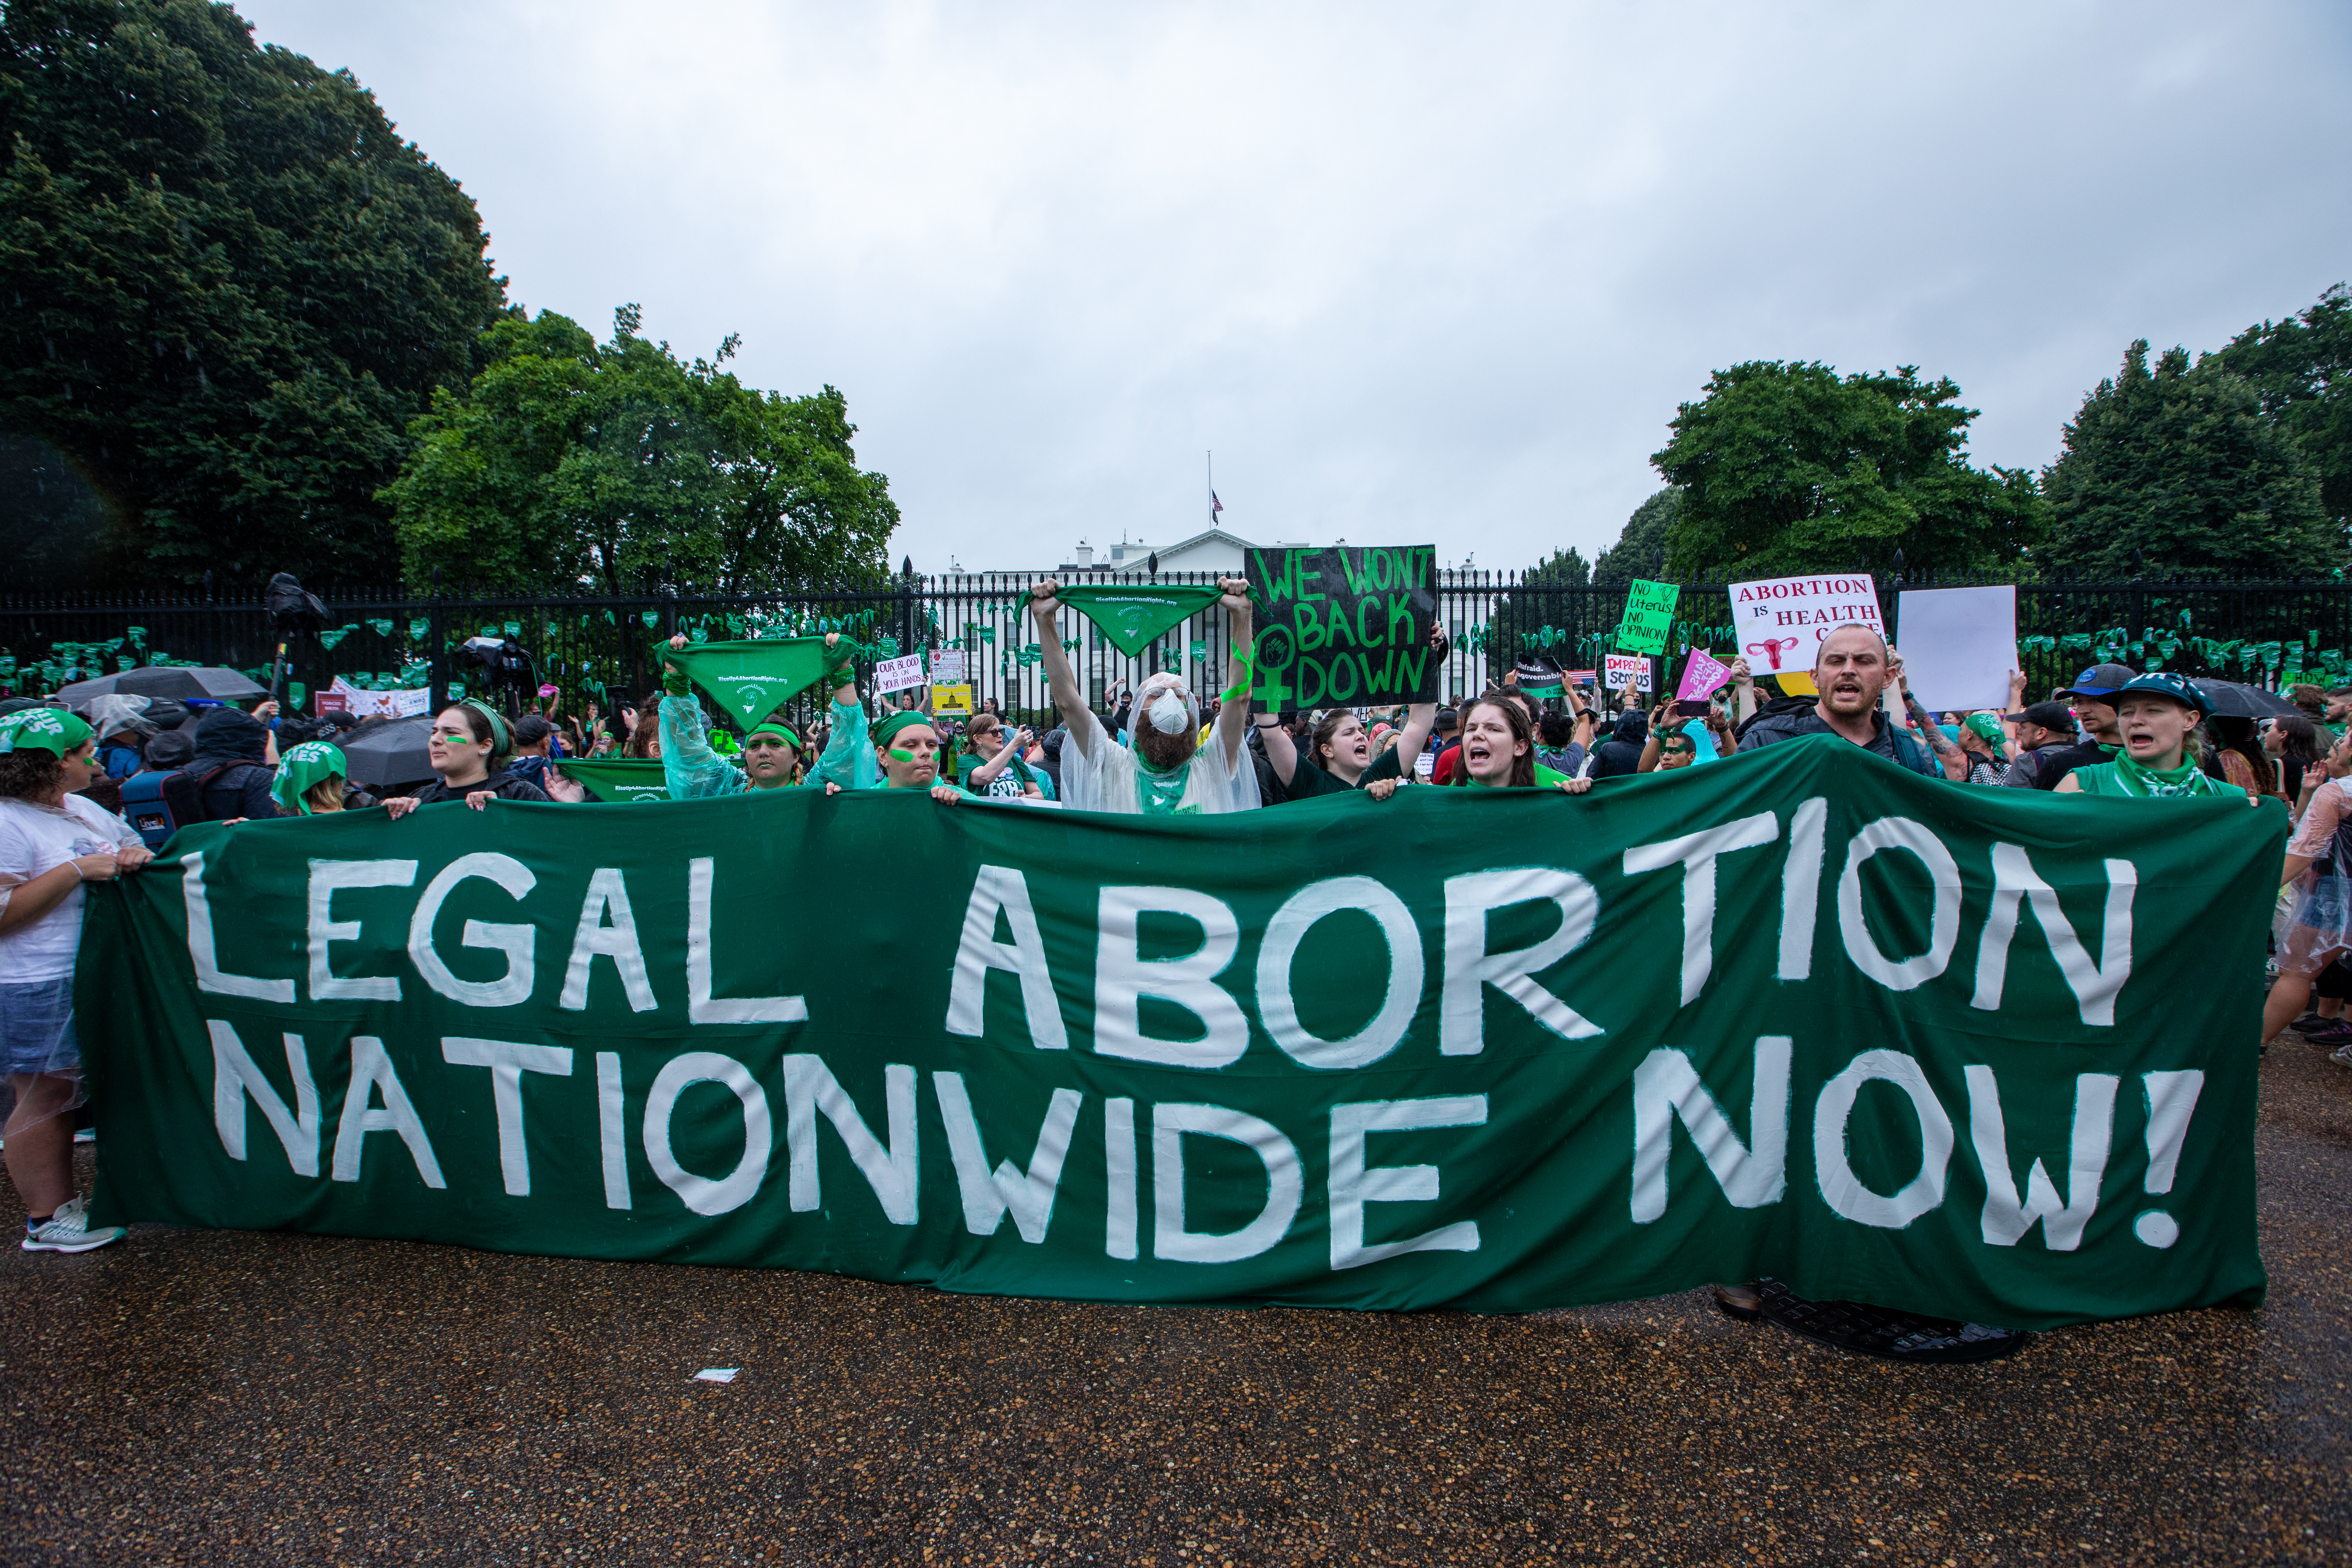 A crowd of people hold up a banner that reads, “Legal abortion nationwide now!”